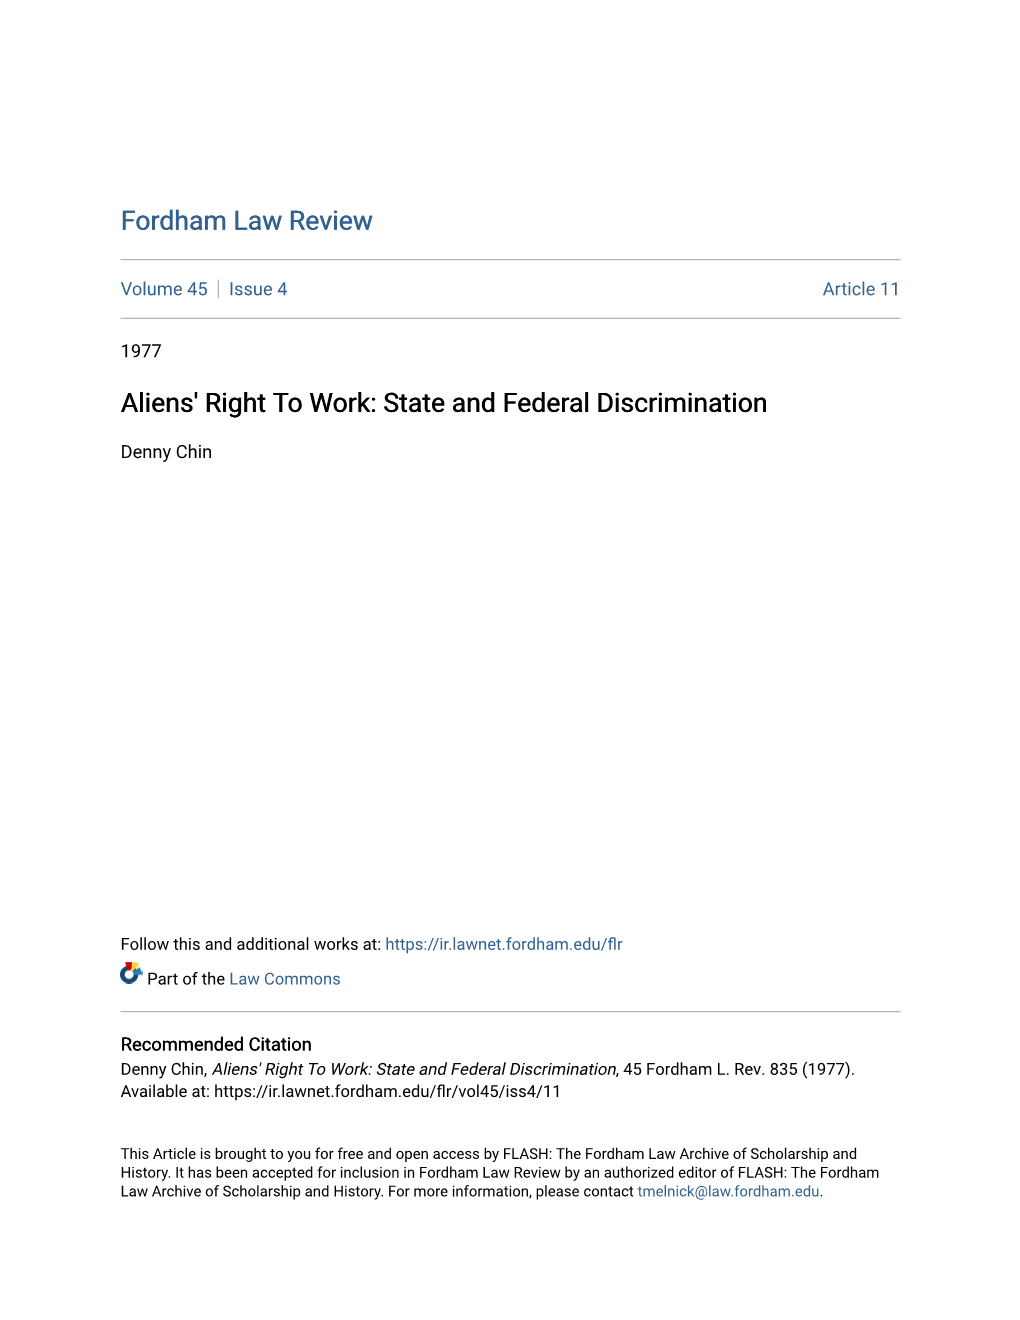 Aliens' Right to Work: State and Federal Discrimination